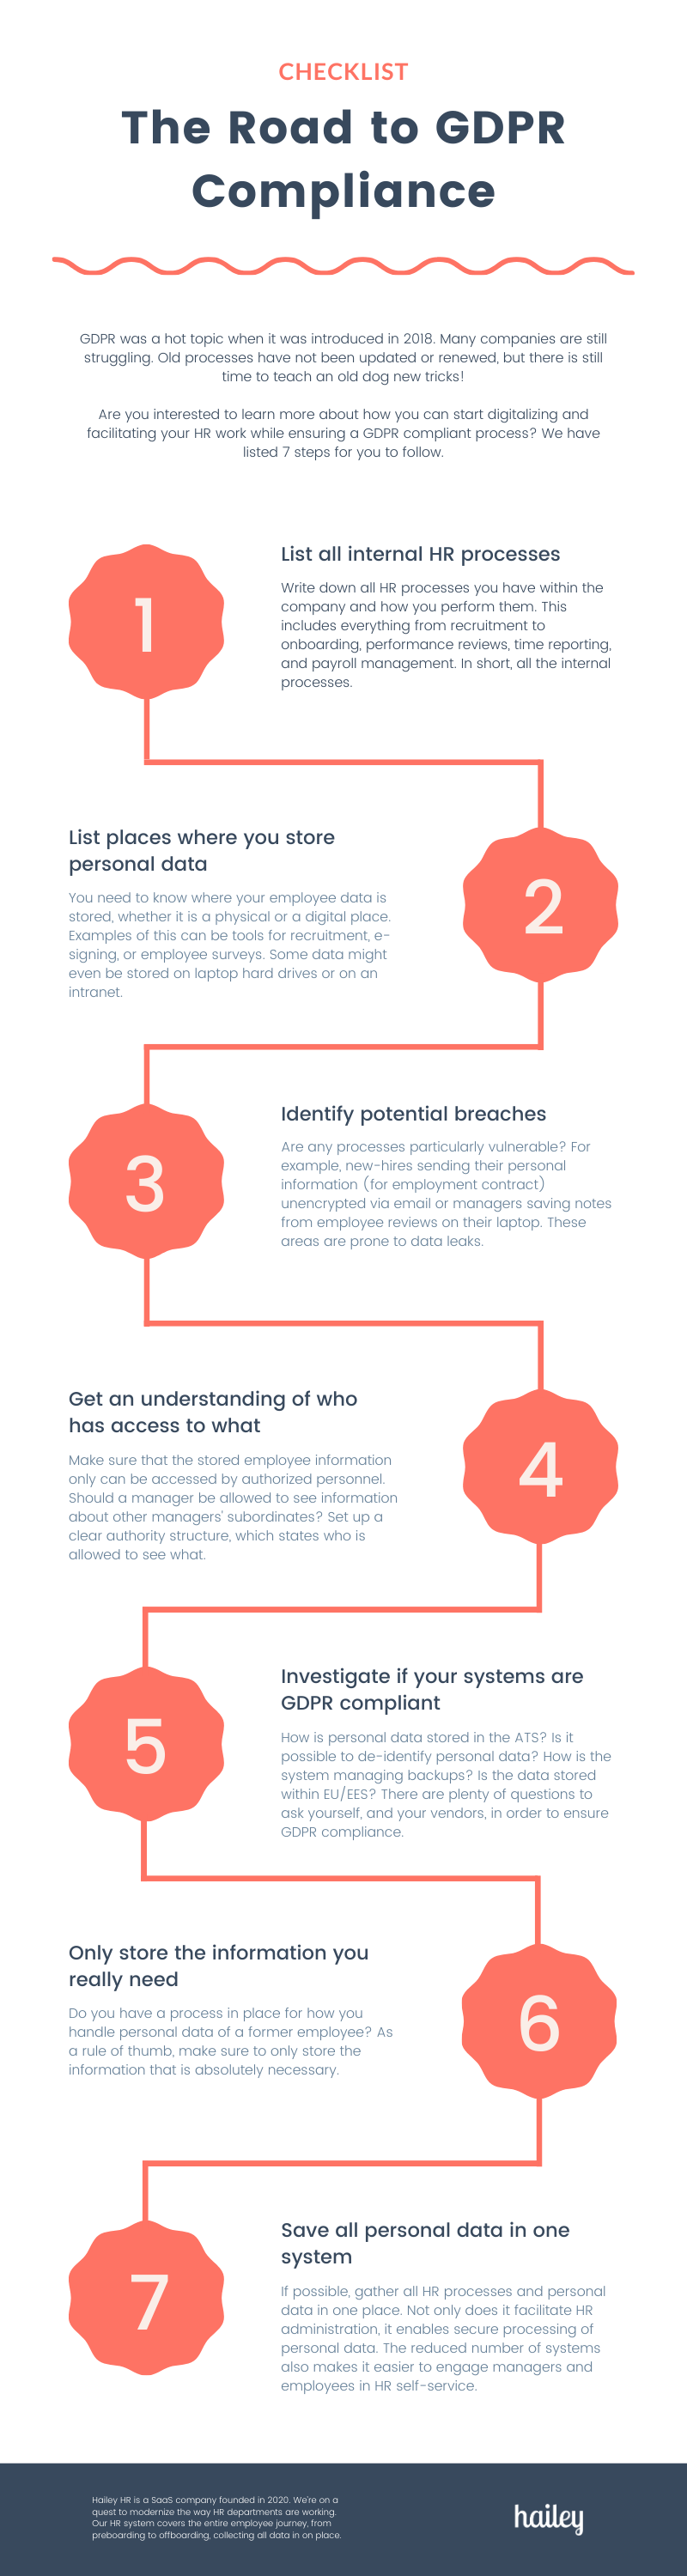 gdpr-compliance-infographic